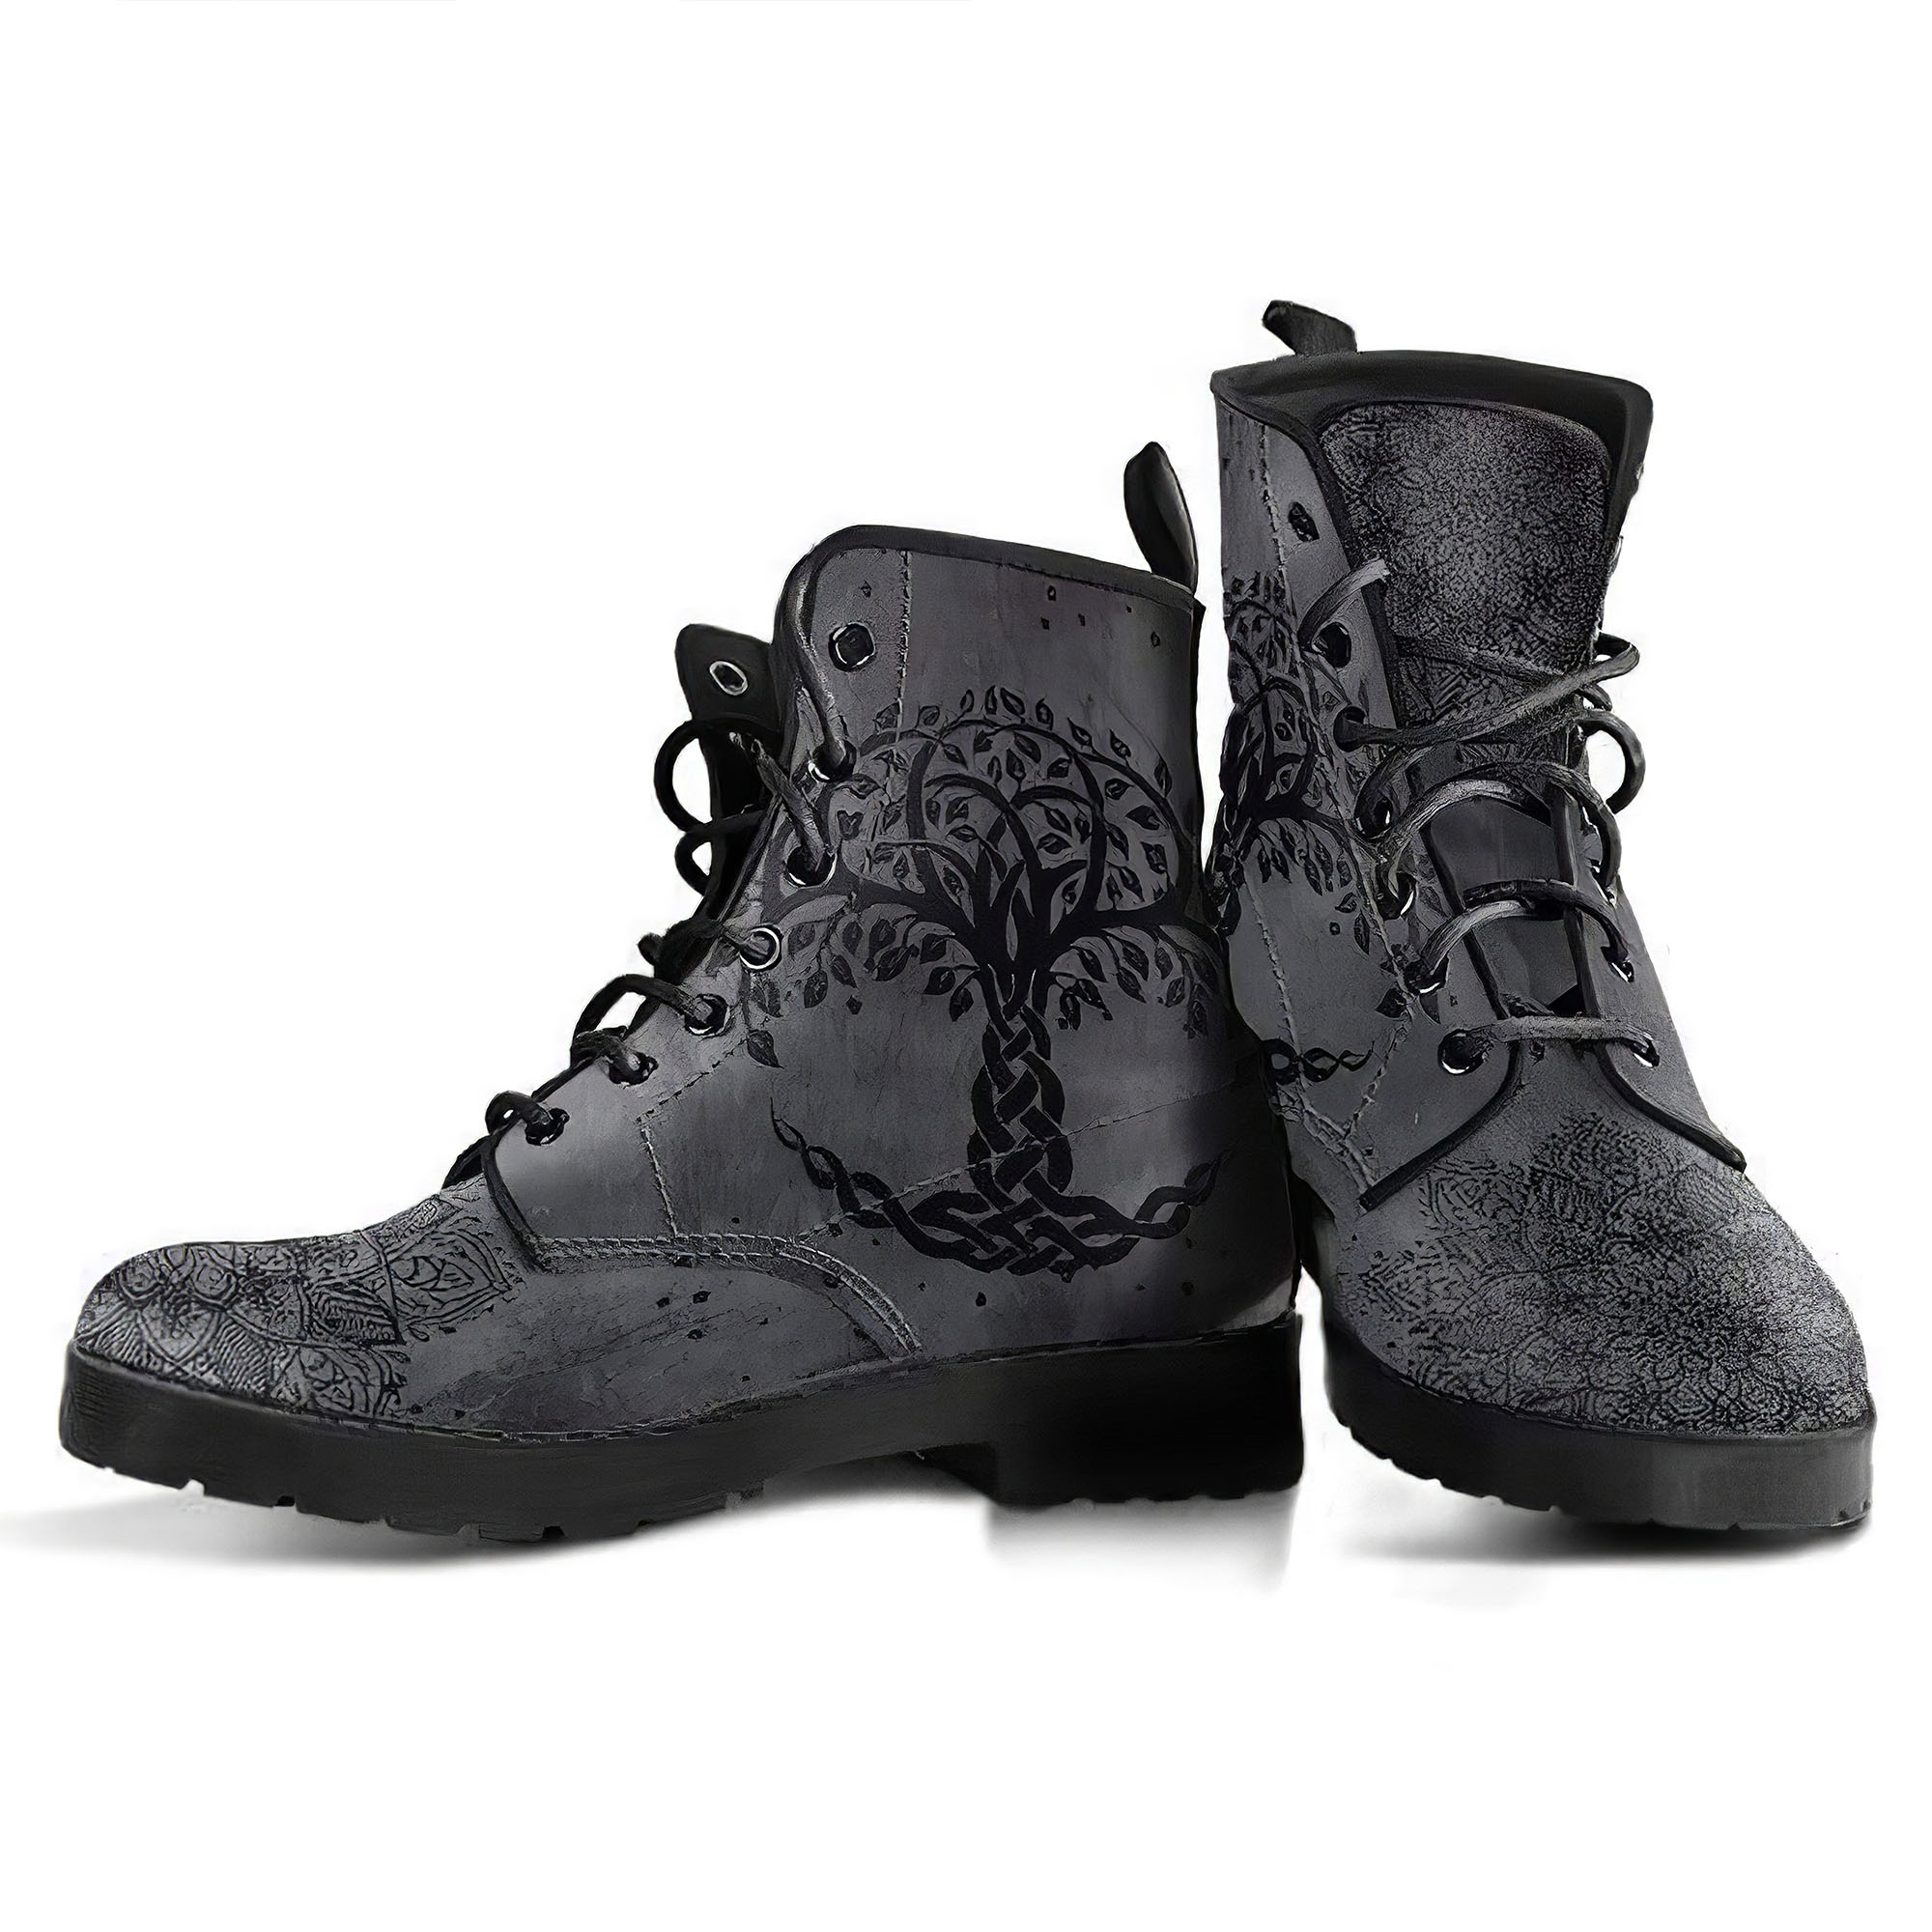 grey-tree-of-life-handcrafted-boots-gp-main.jpg